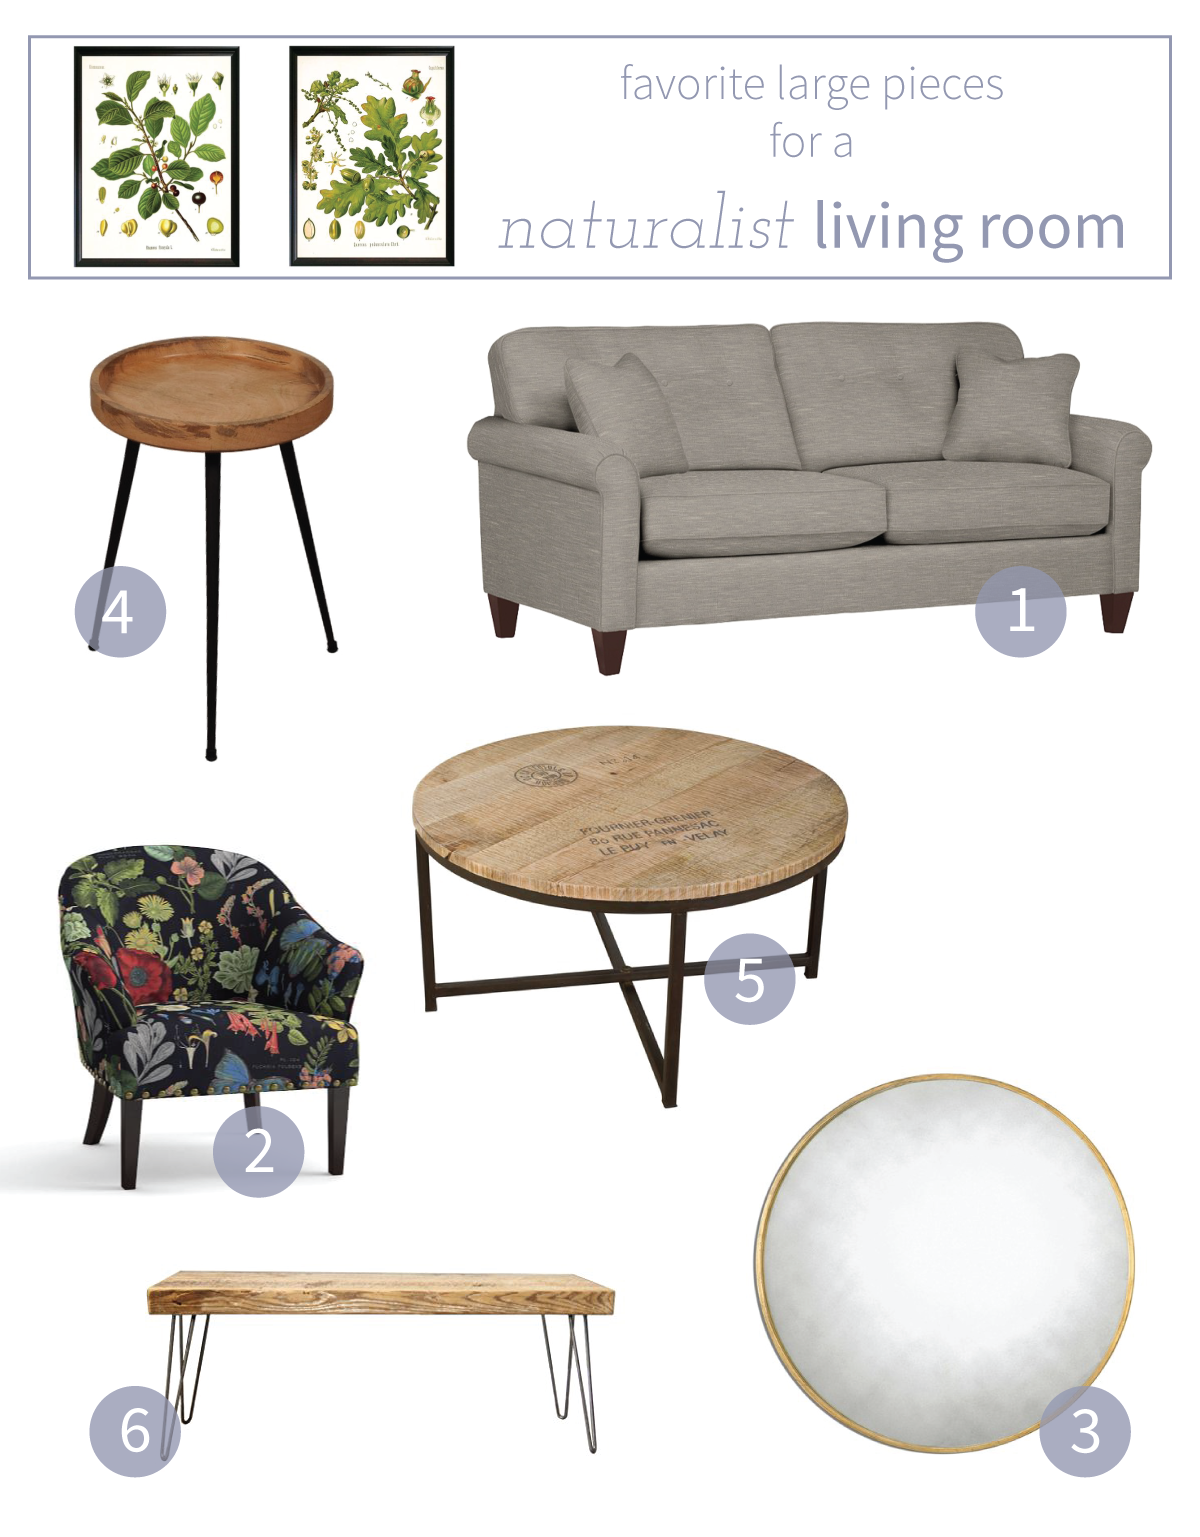 These are some of my favorite large-scale pieces for our naturalist living room makeover.